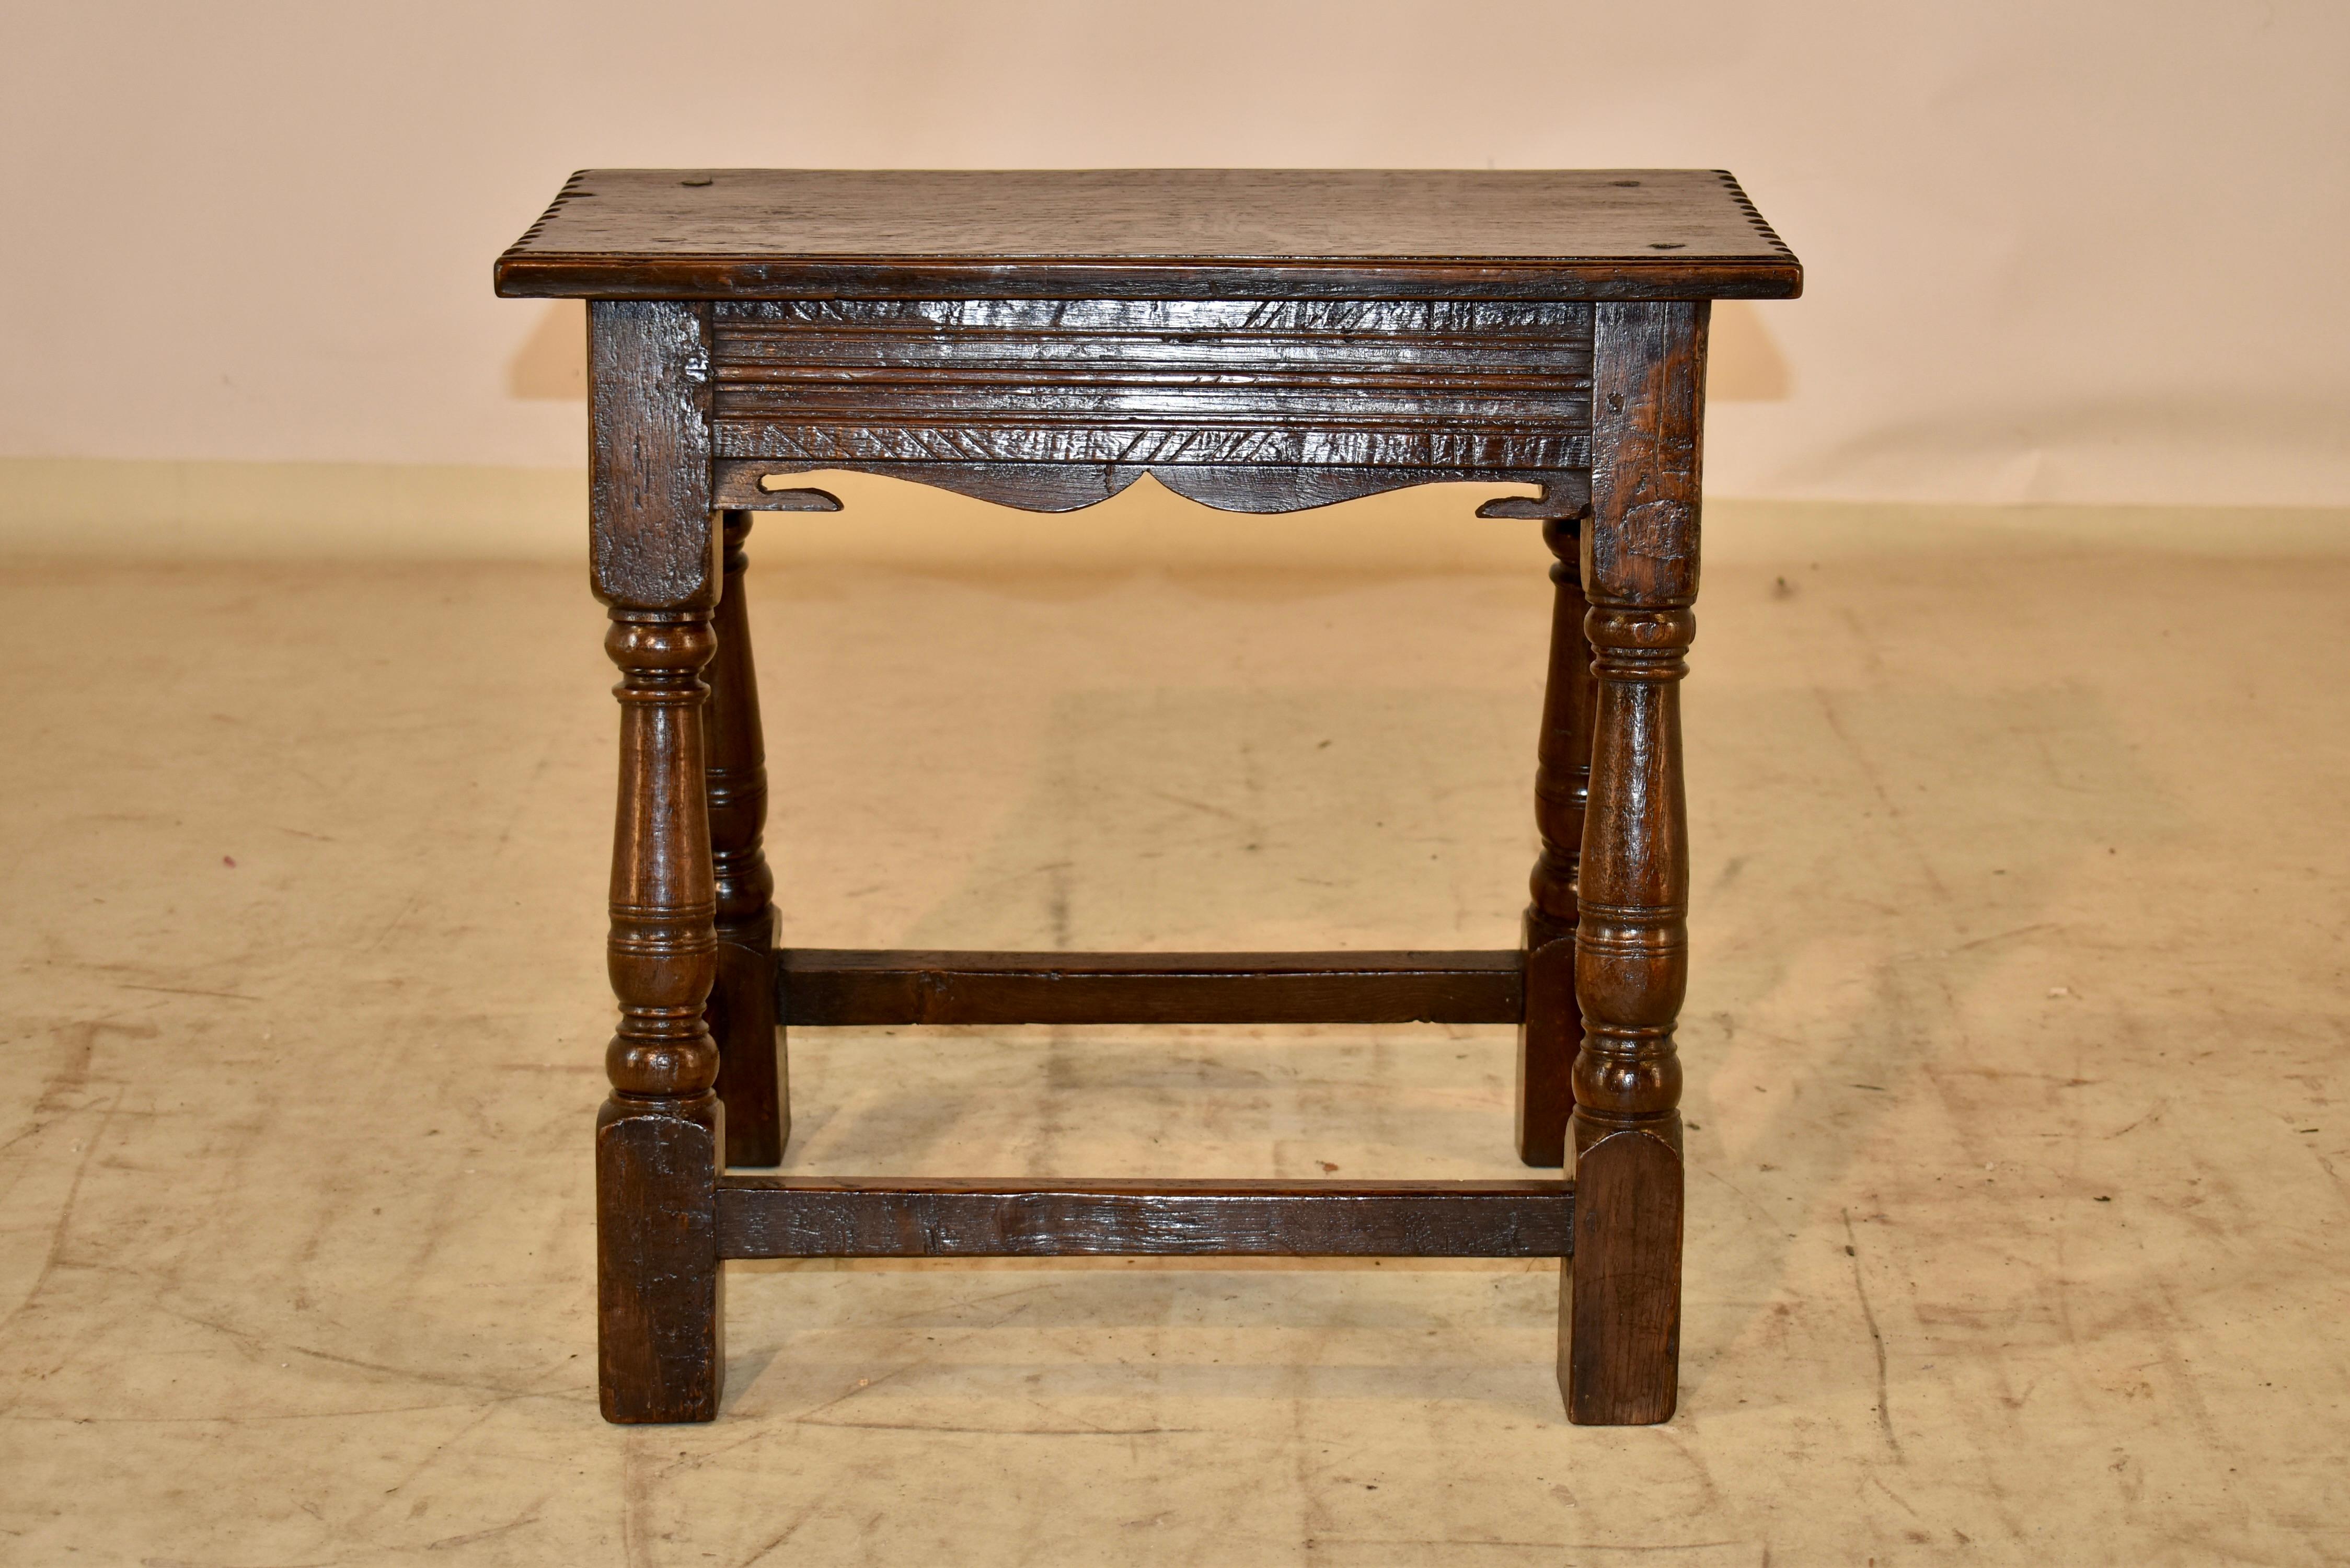 circa 1690-1720 William and Mary period English joint stool made from oak. The top has routing decoration on the front and back sides, and has pie crust decoration on the sides. The construction is pegged. The top follows down to a lovely hand